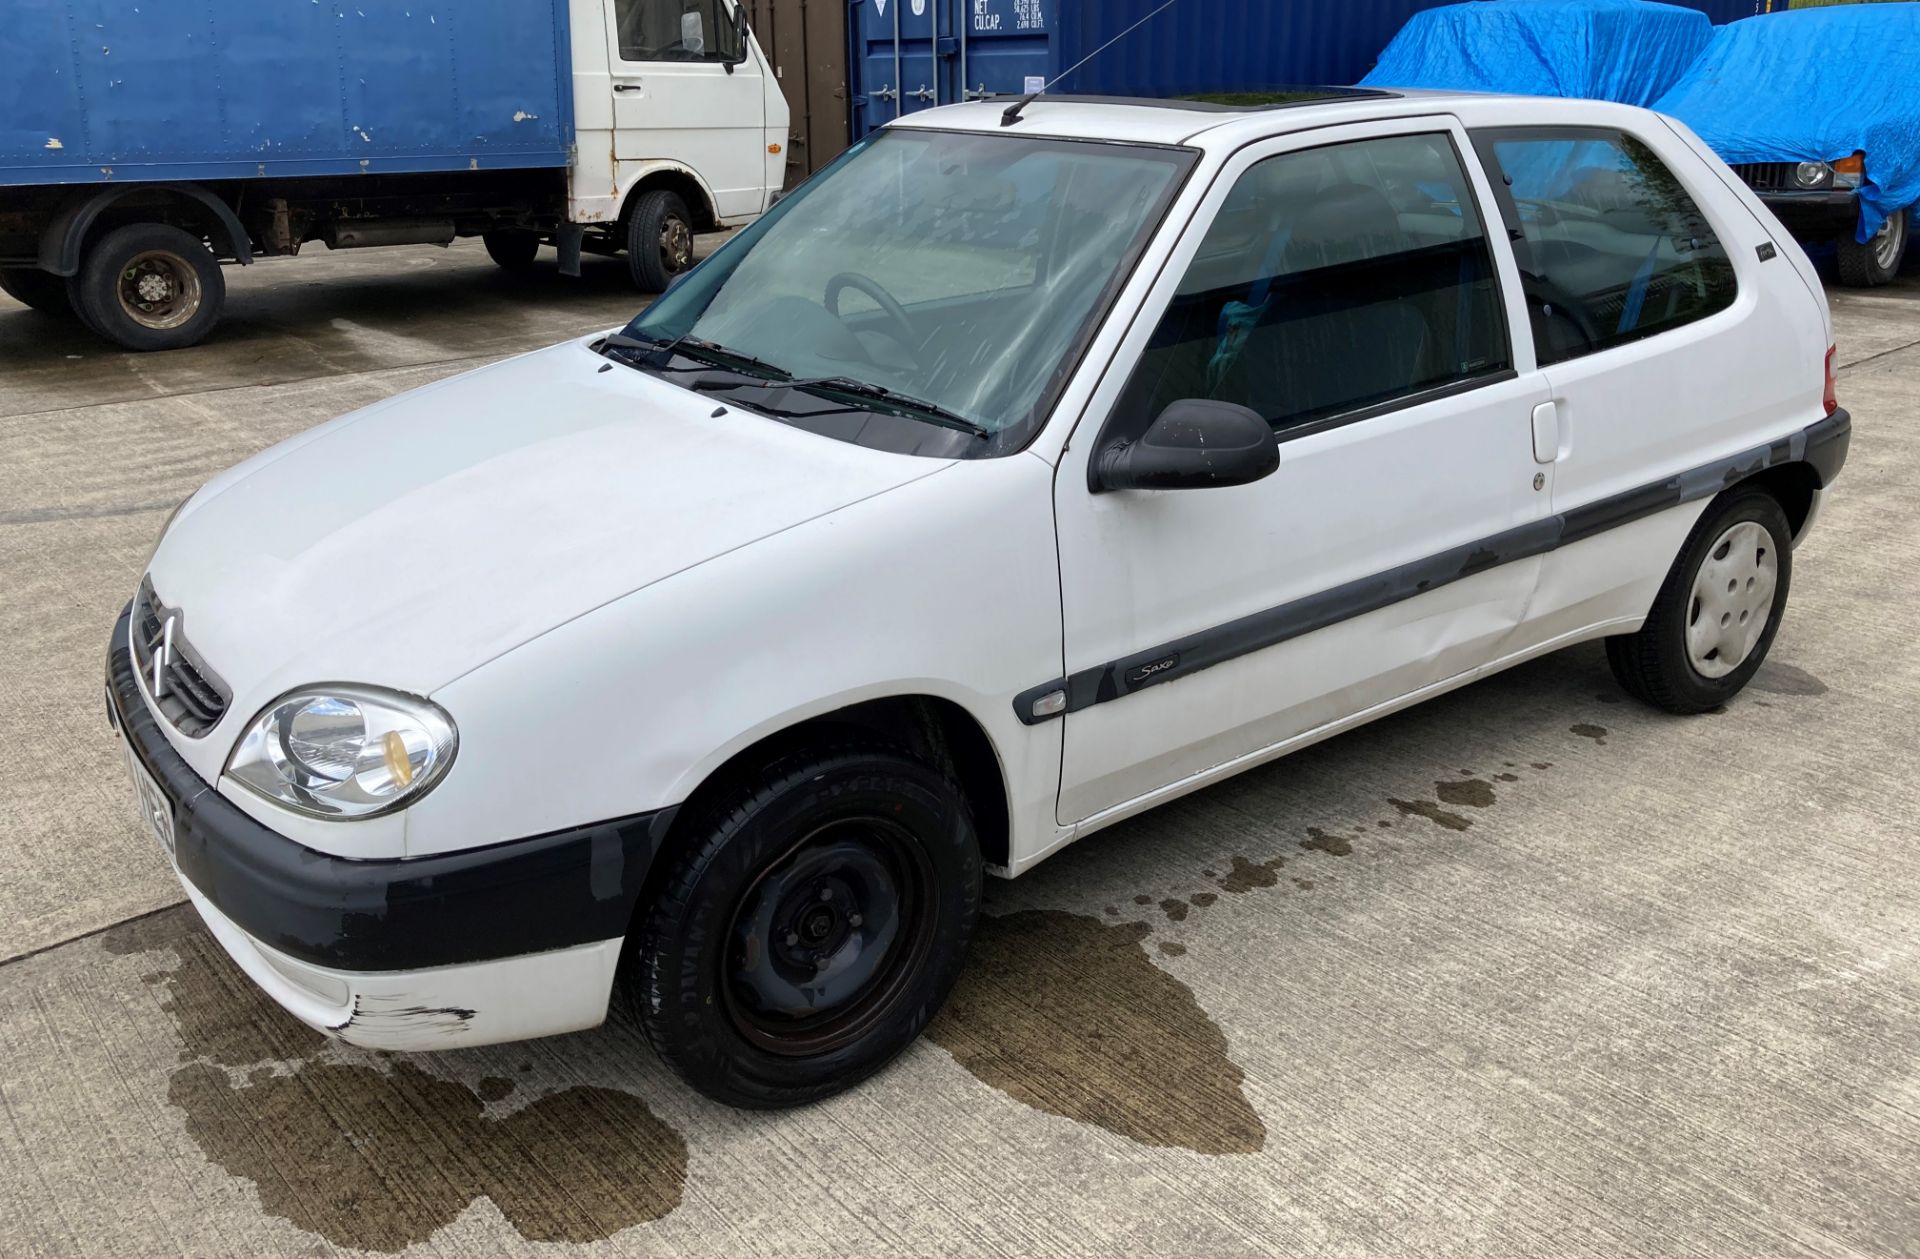 CITROEN SAXO FORTE 1.1 THREE DOOR HATCHBACK - Petrol - White. FROM A DECEASED ESTATE. - Image 3 of 15